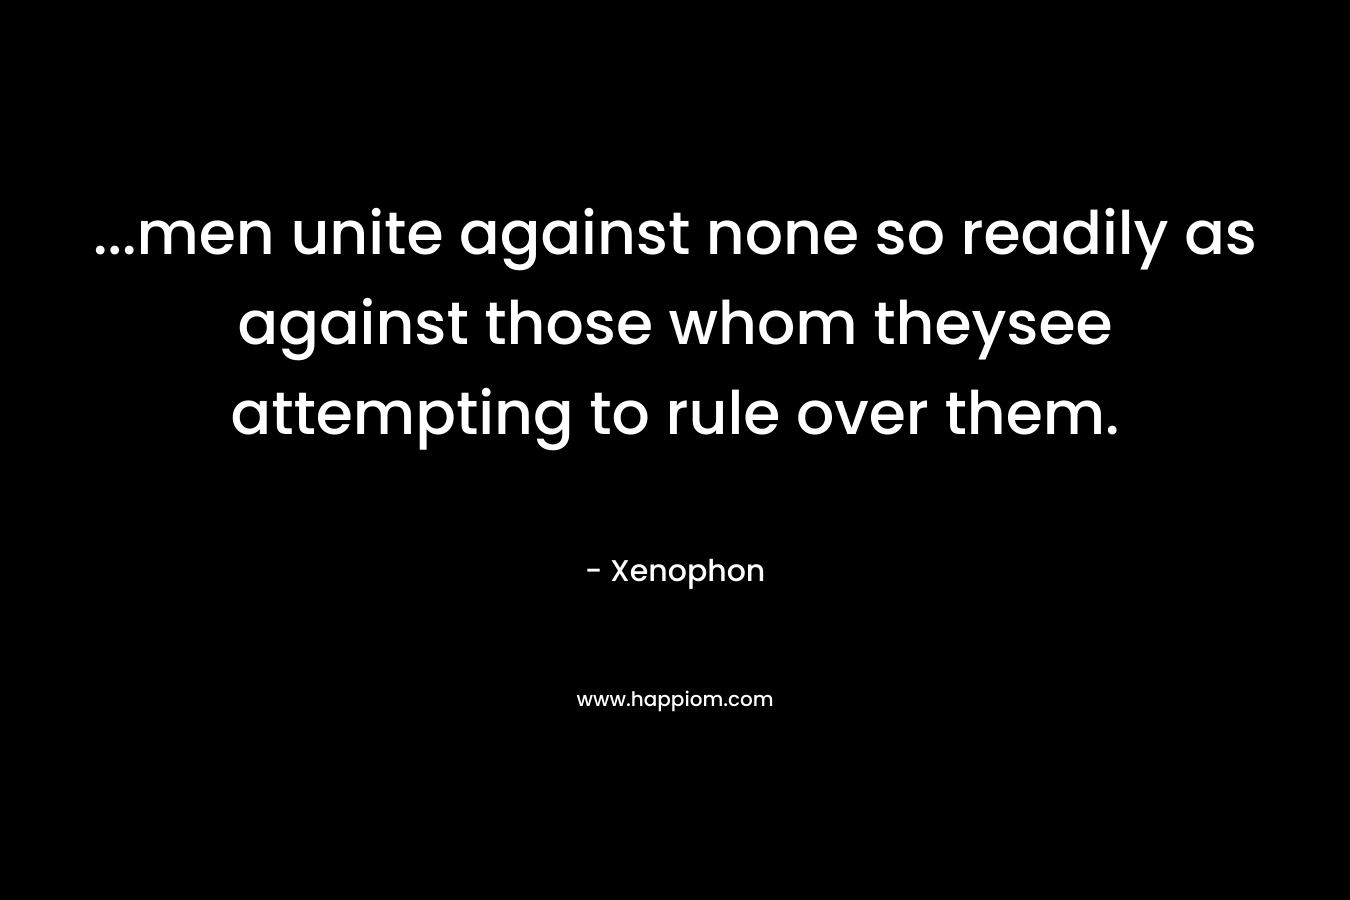 …men unite against none so readily as against those whom theysee attempting to rule over them. – Xenophon